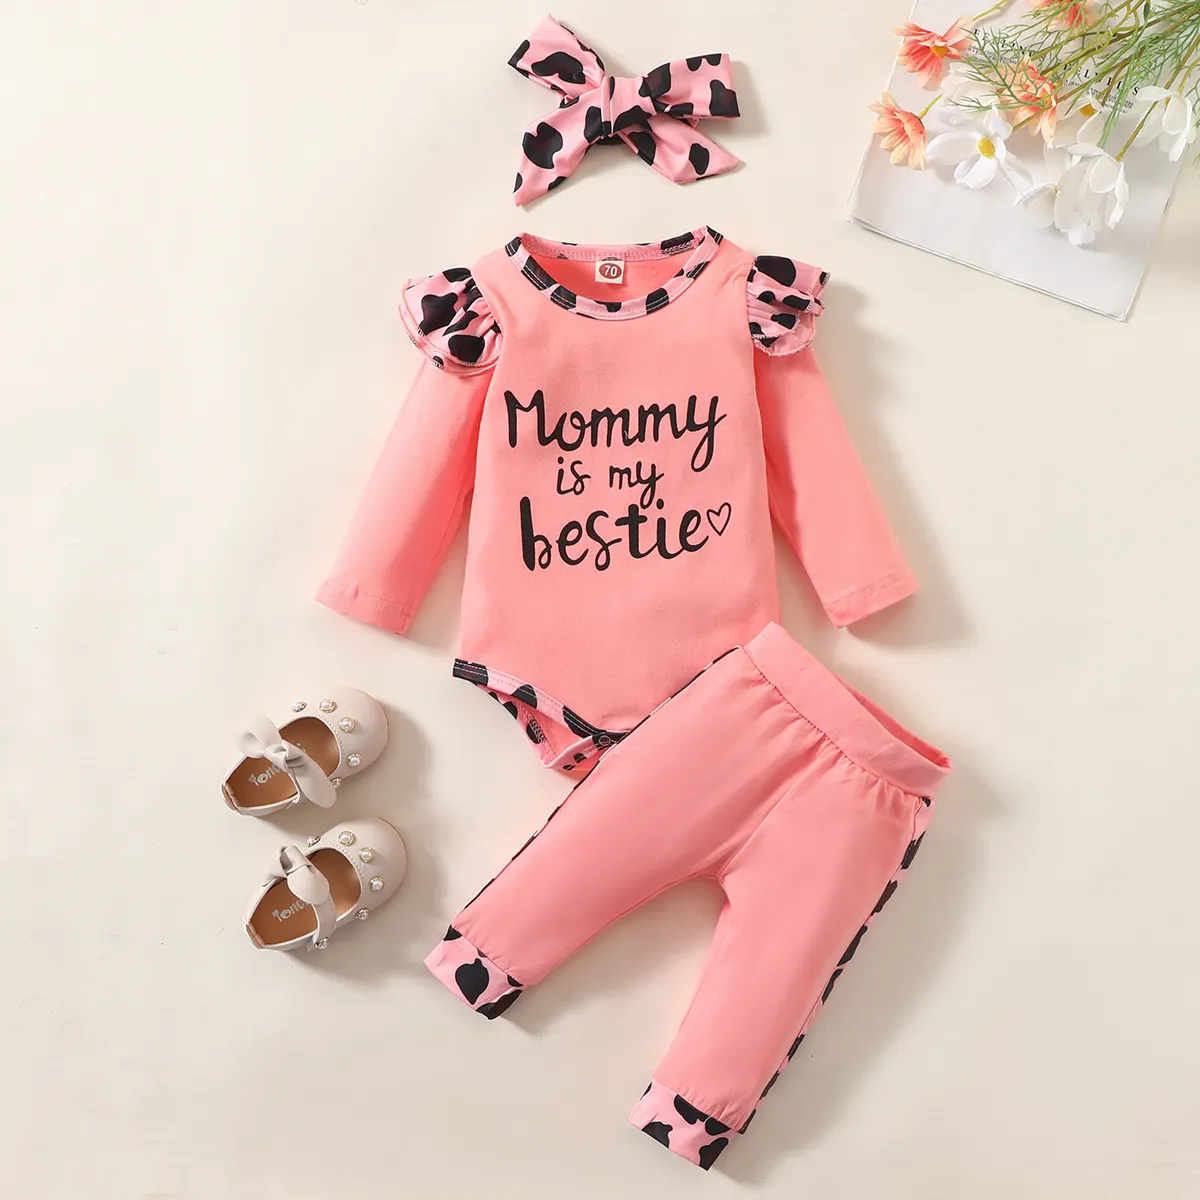 Newborn Girls Clothes Suit Long Sleeve Romper Pink Pants And Headband Set Newborn Baby Girls Outfit 3pcs